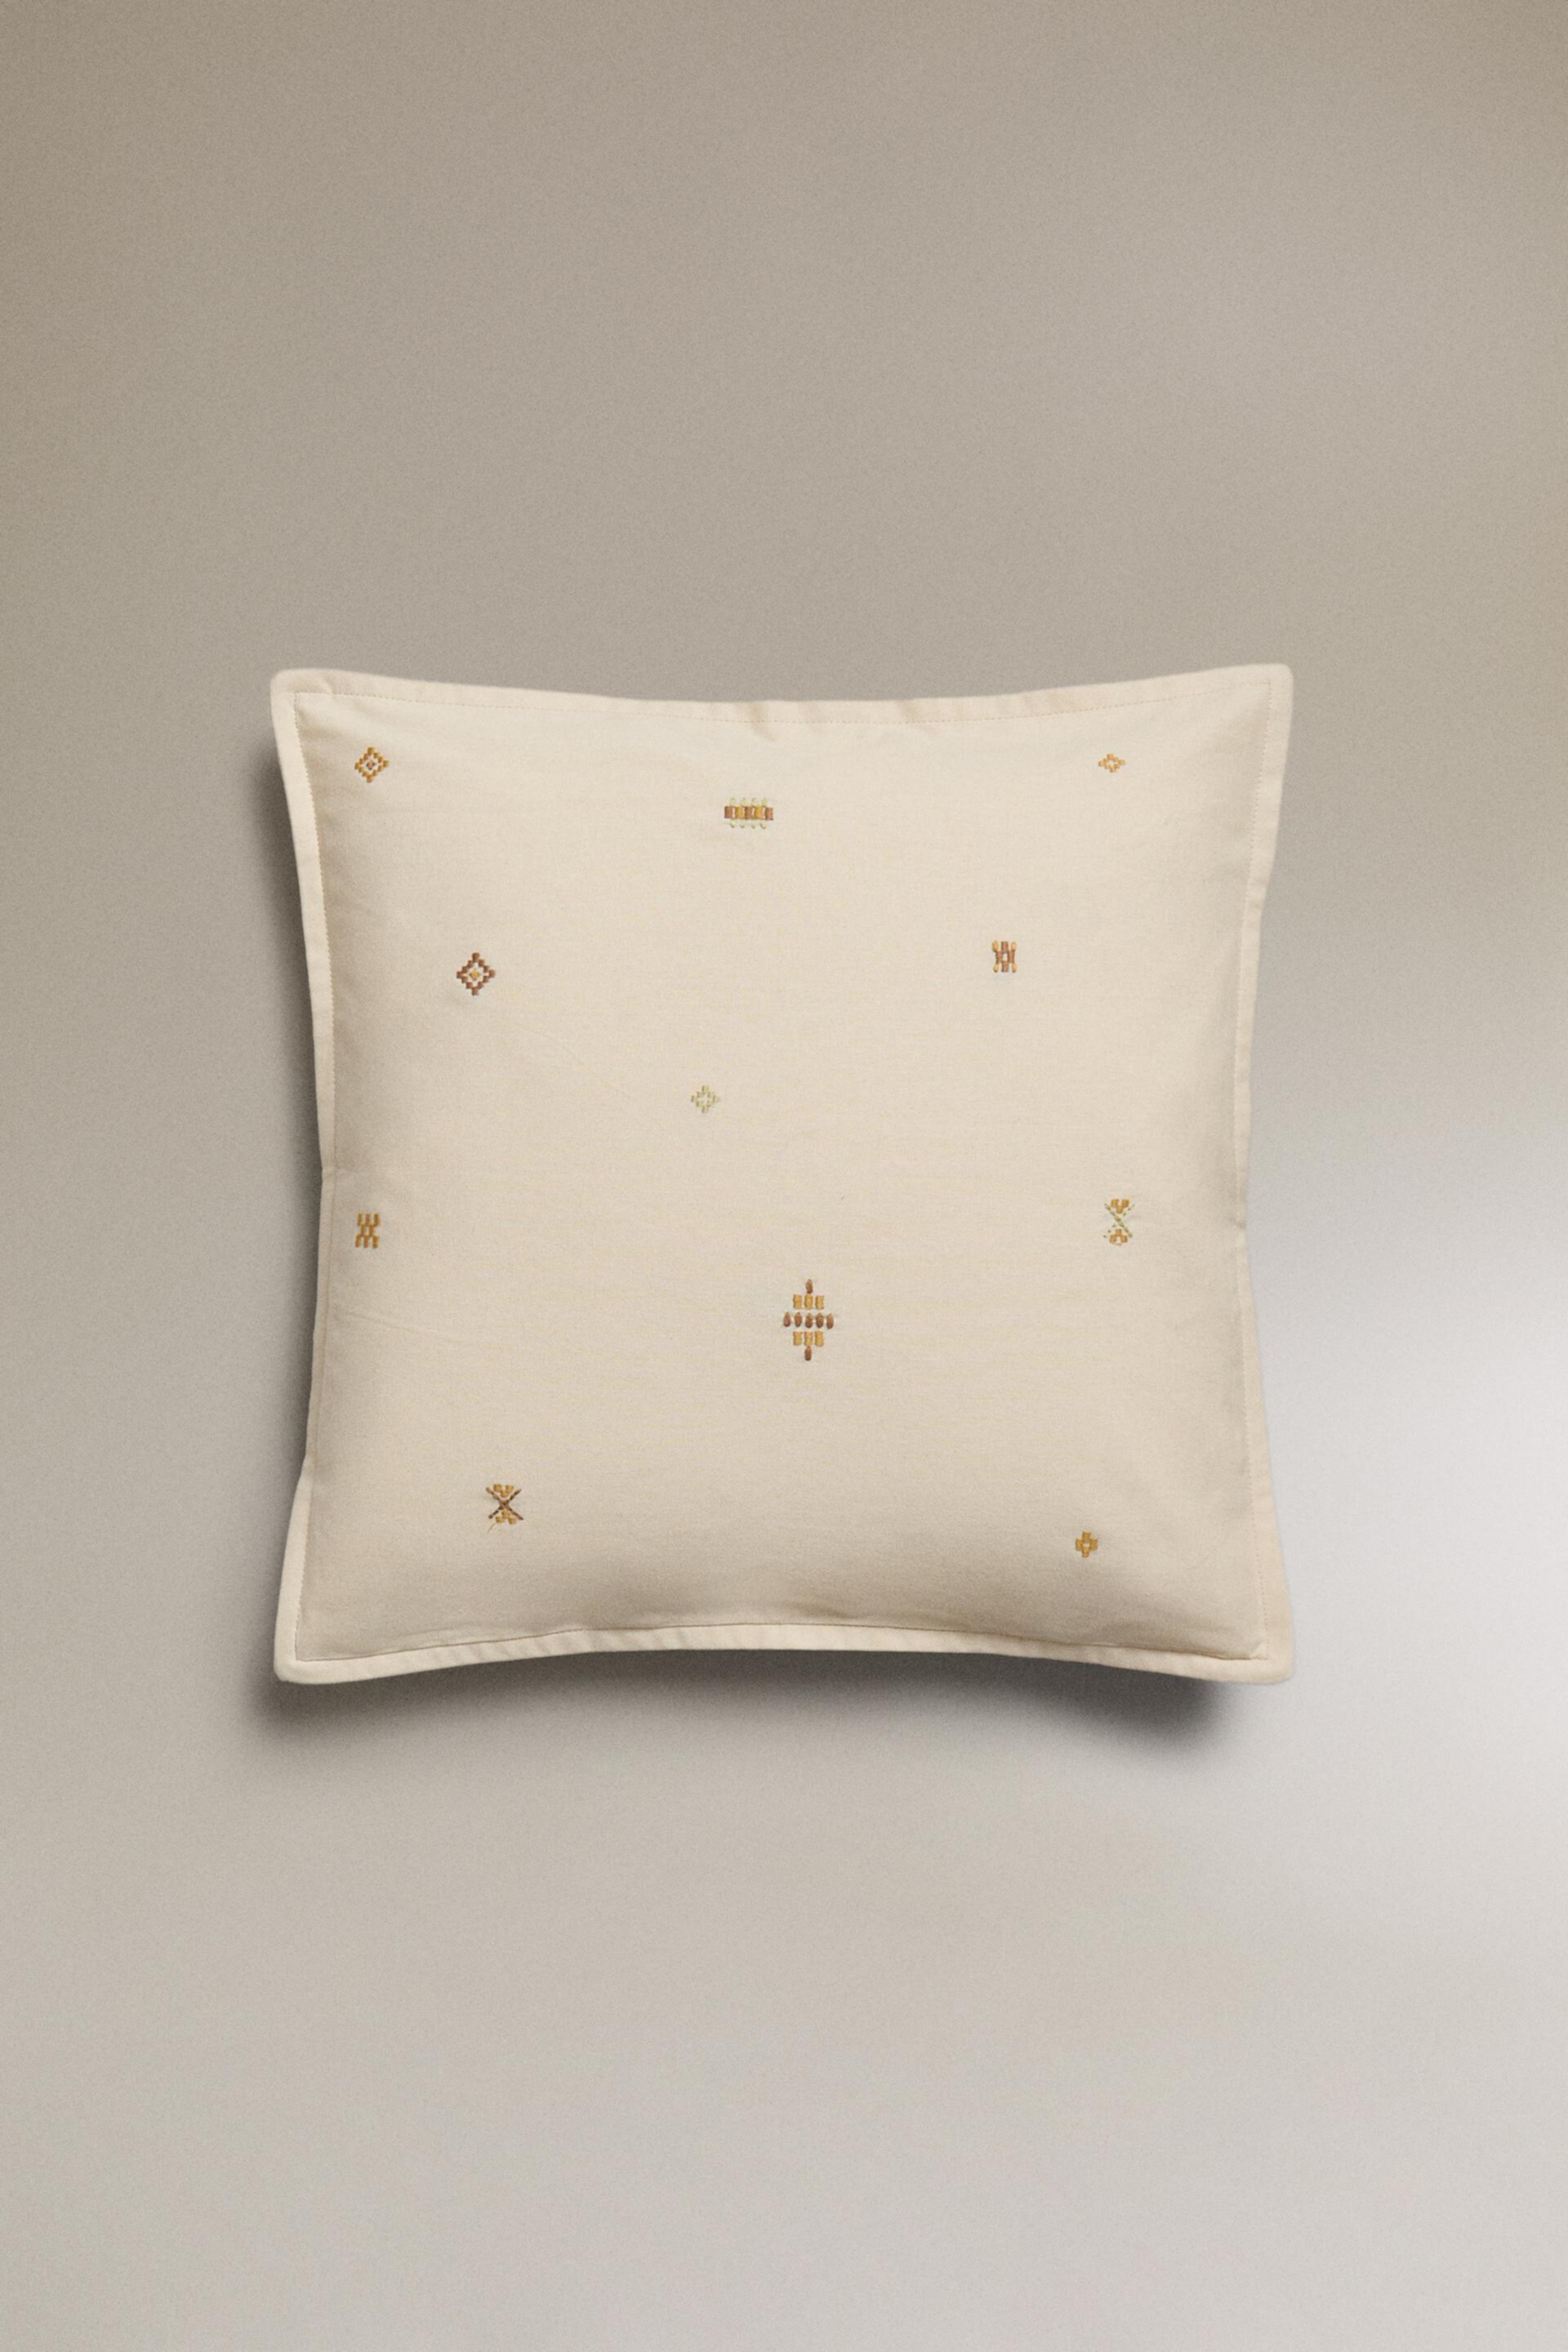 EMBROIDERED THROW PILLOW COVER ZARA